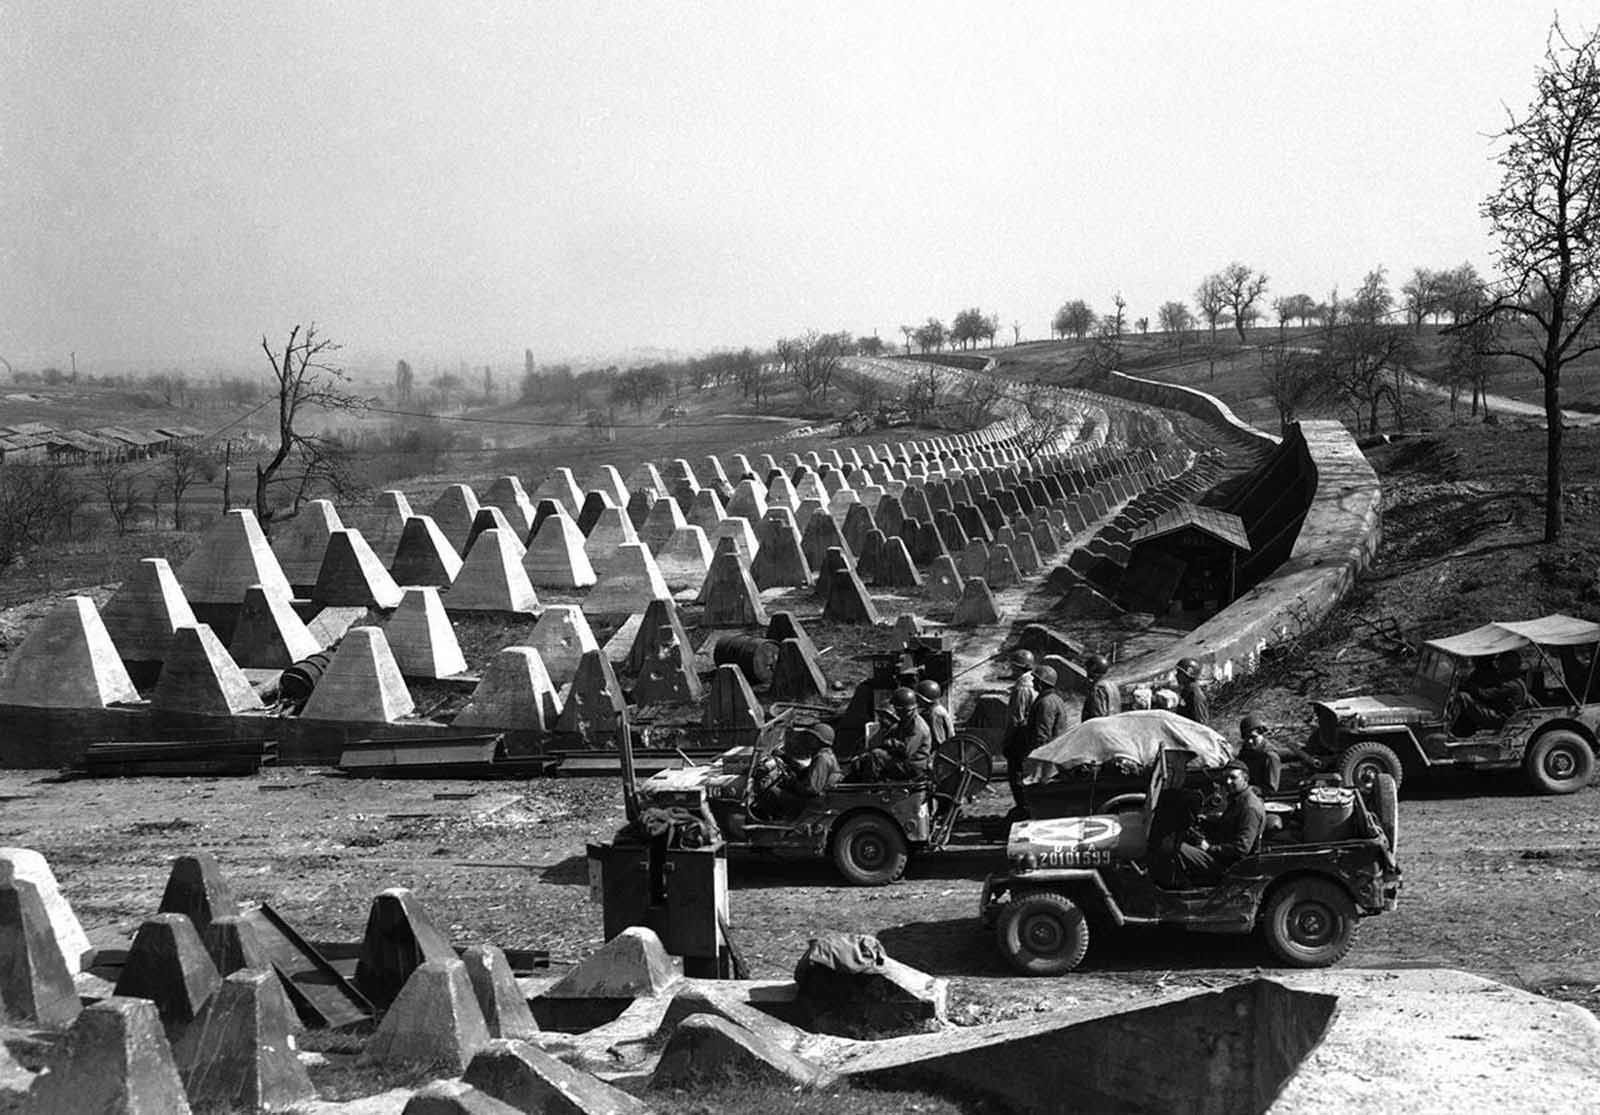 Men of the American 7th Army pour through a breach in the Siegfried Line defenses, on their way to Karlsruhe, Germany on March 27, 1945, which lies on the road to Stuttgart.